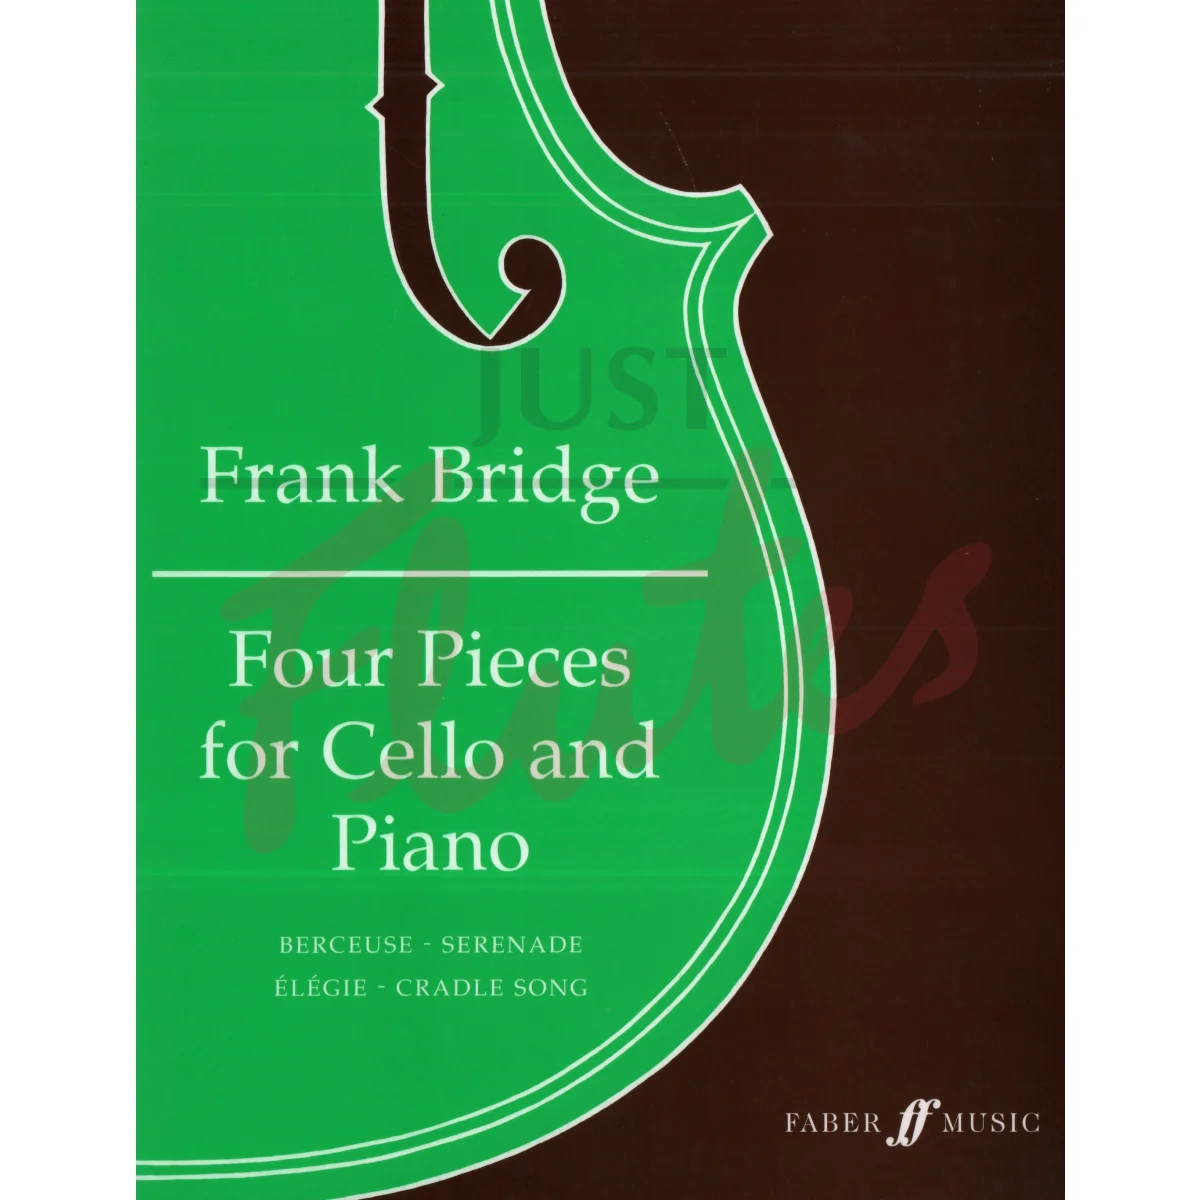 Four Pieces For Cello and Piano